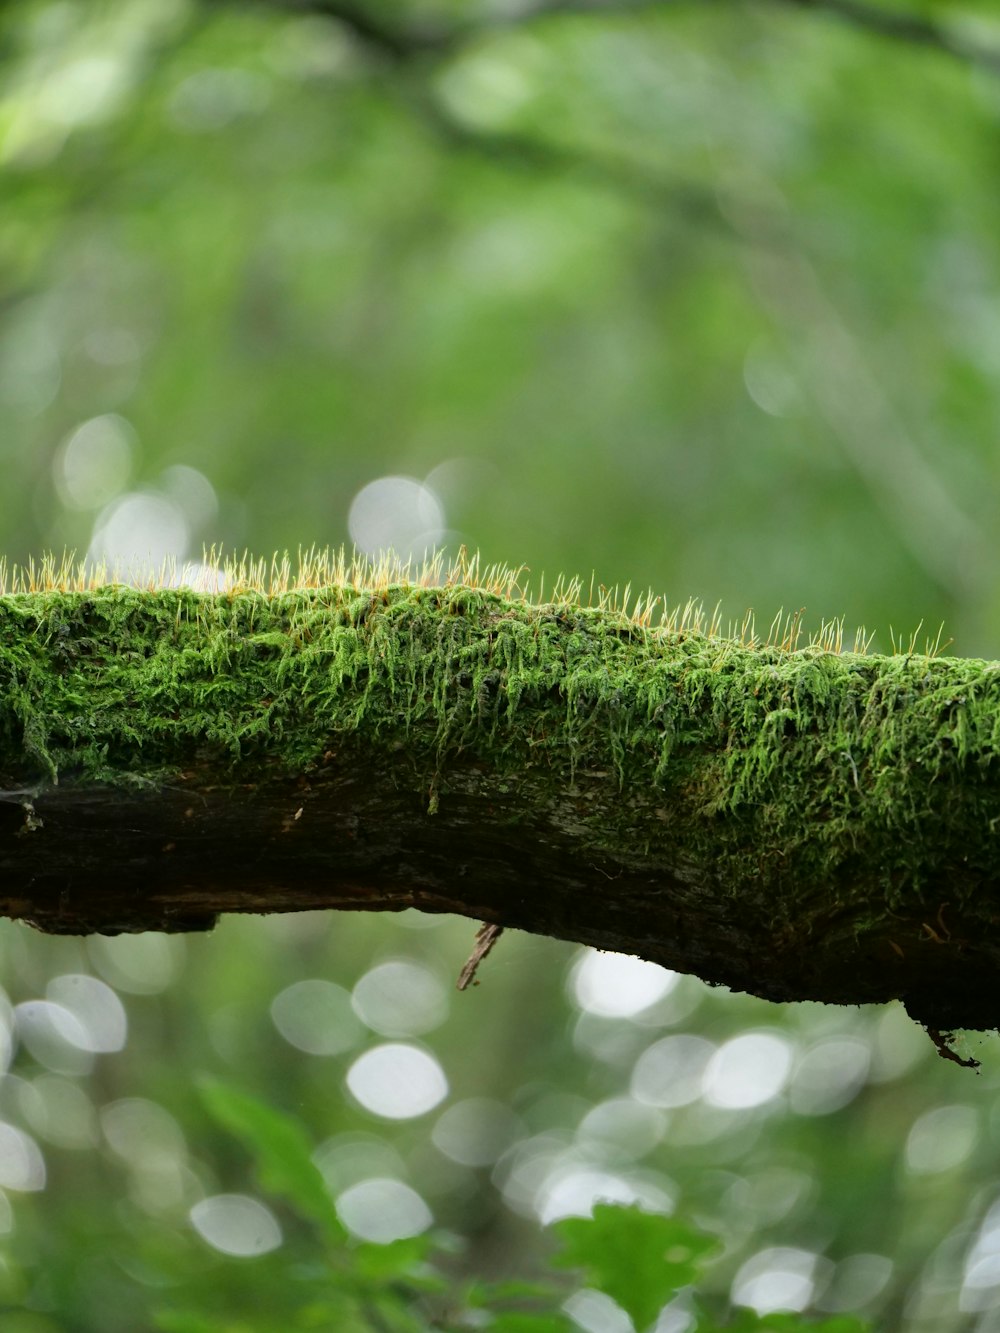 a close up of a mossy tree branch